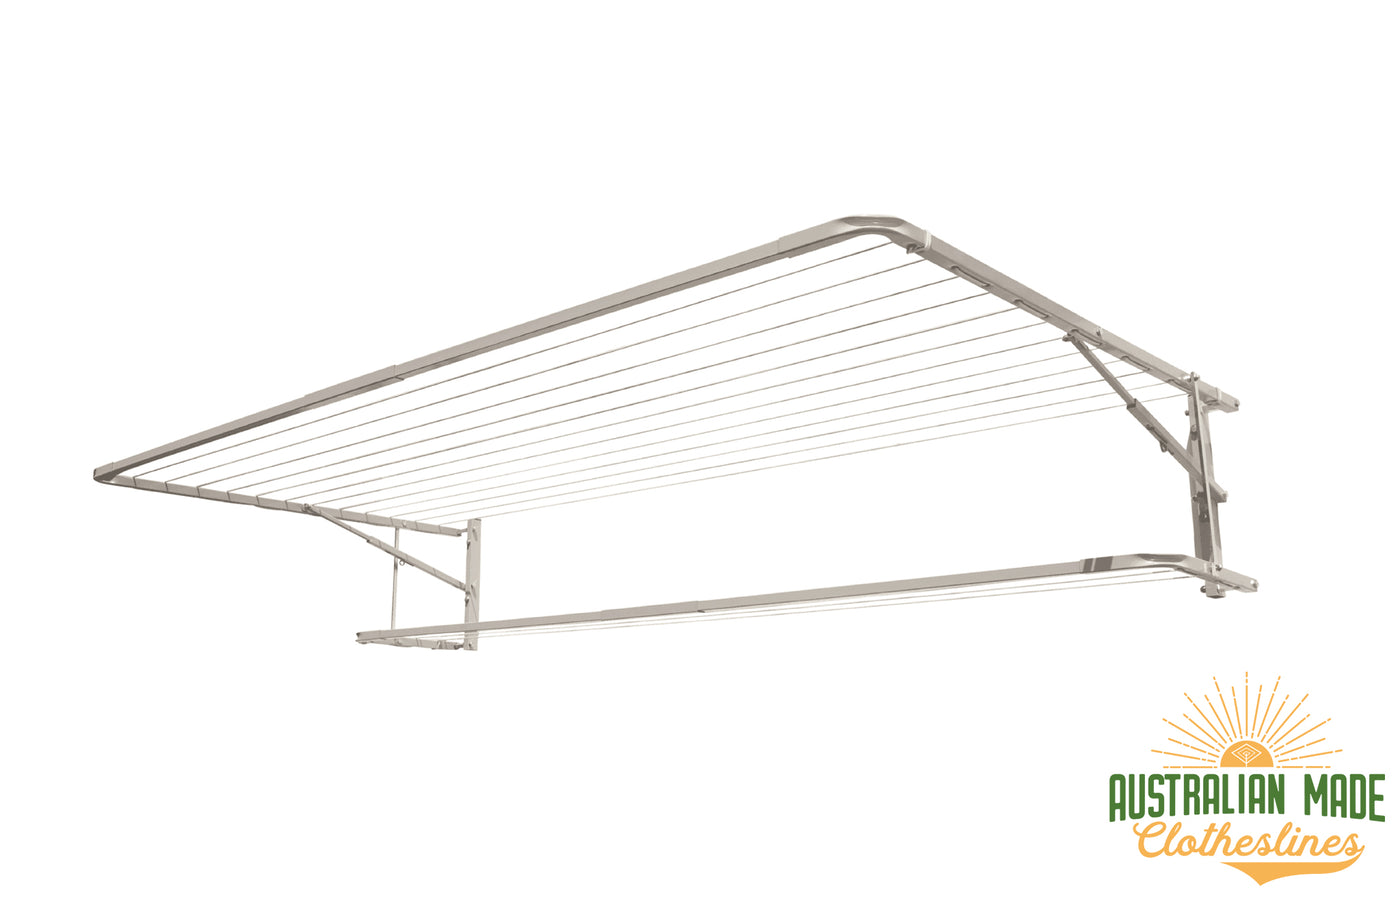 Eco Lowline Attachment - Surfmist Right Side Perspective - Australian Made Clotheslines